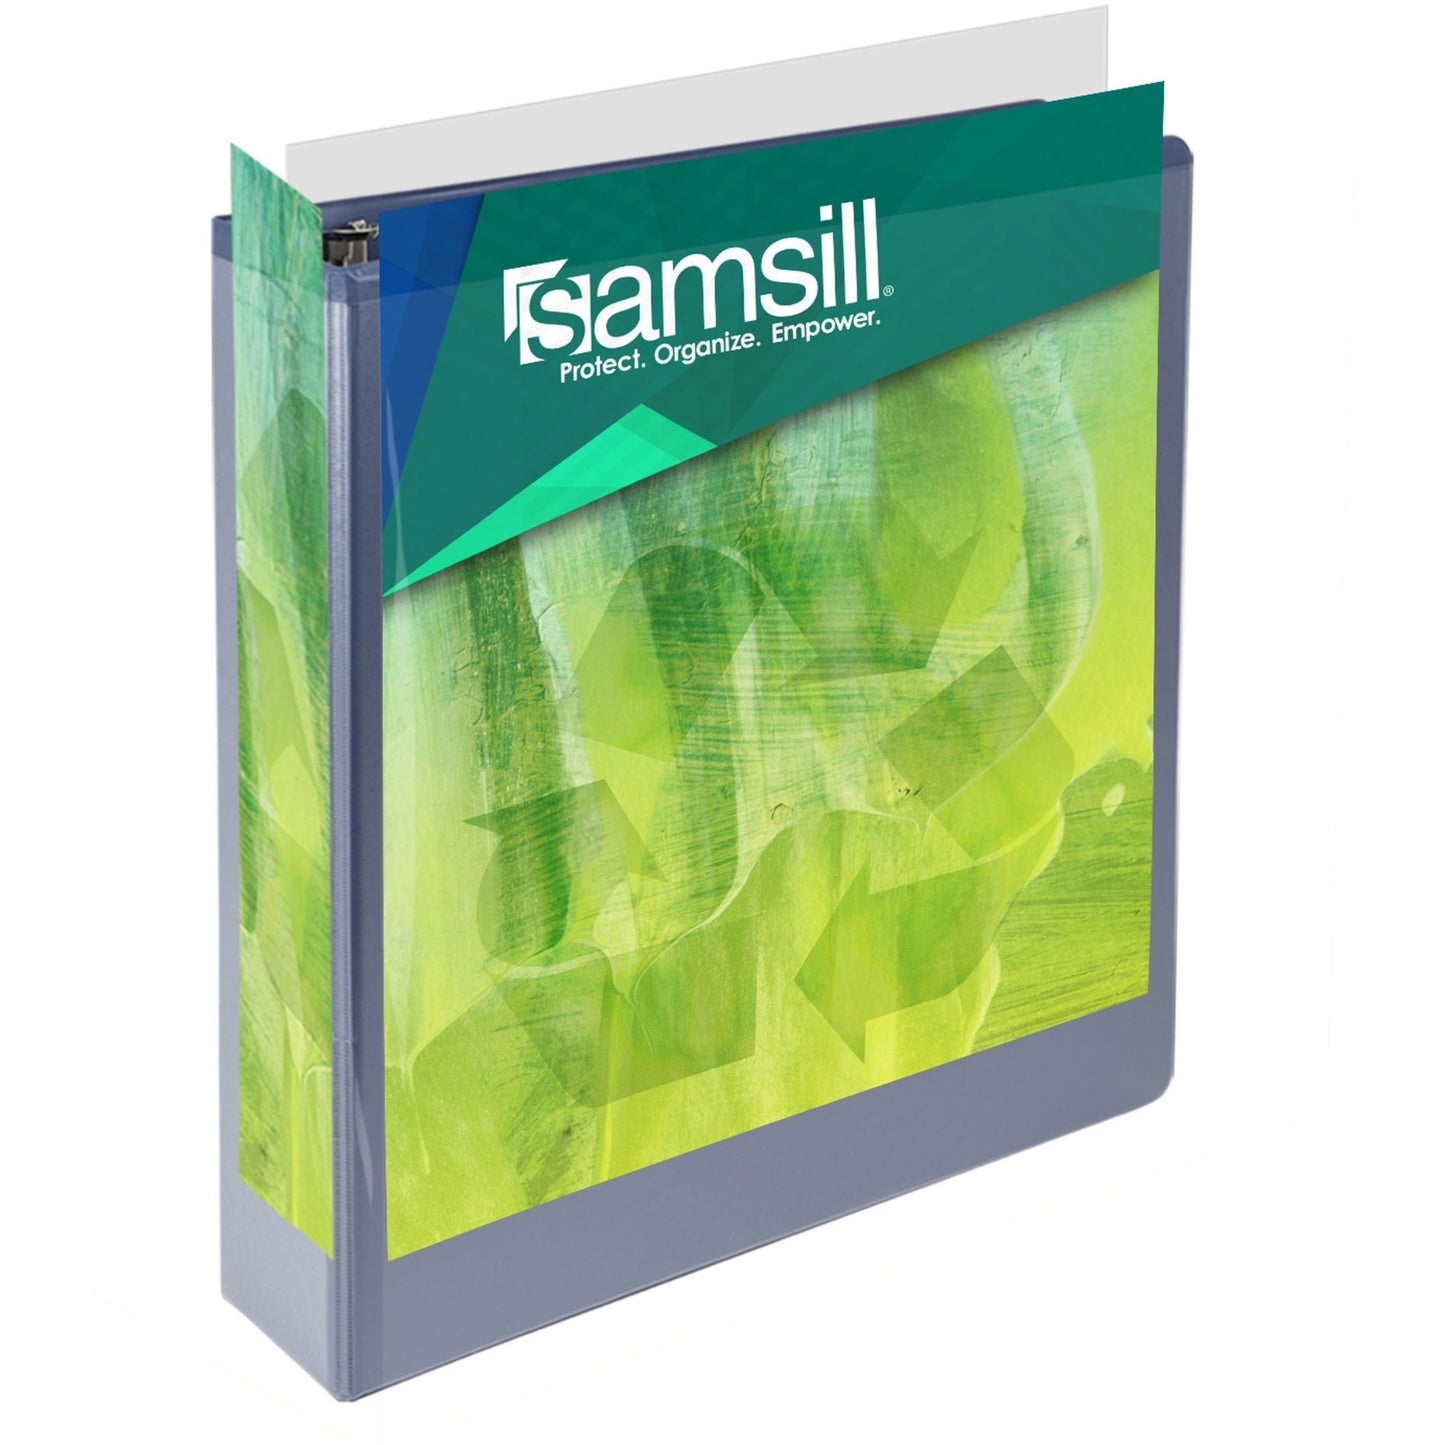 Samsill Earth's Choice Plant-Based View Durable 2 Inch 3 Ring Binders - Assortment 4 Pack